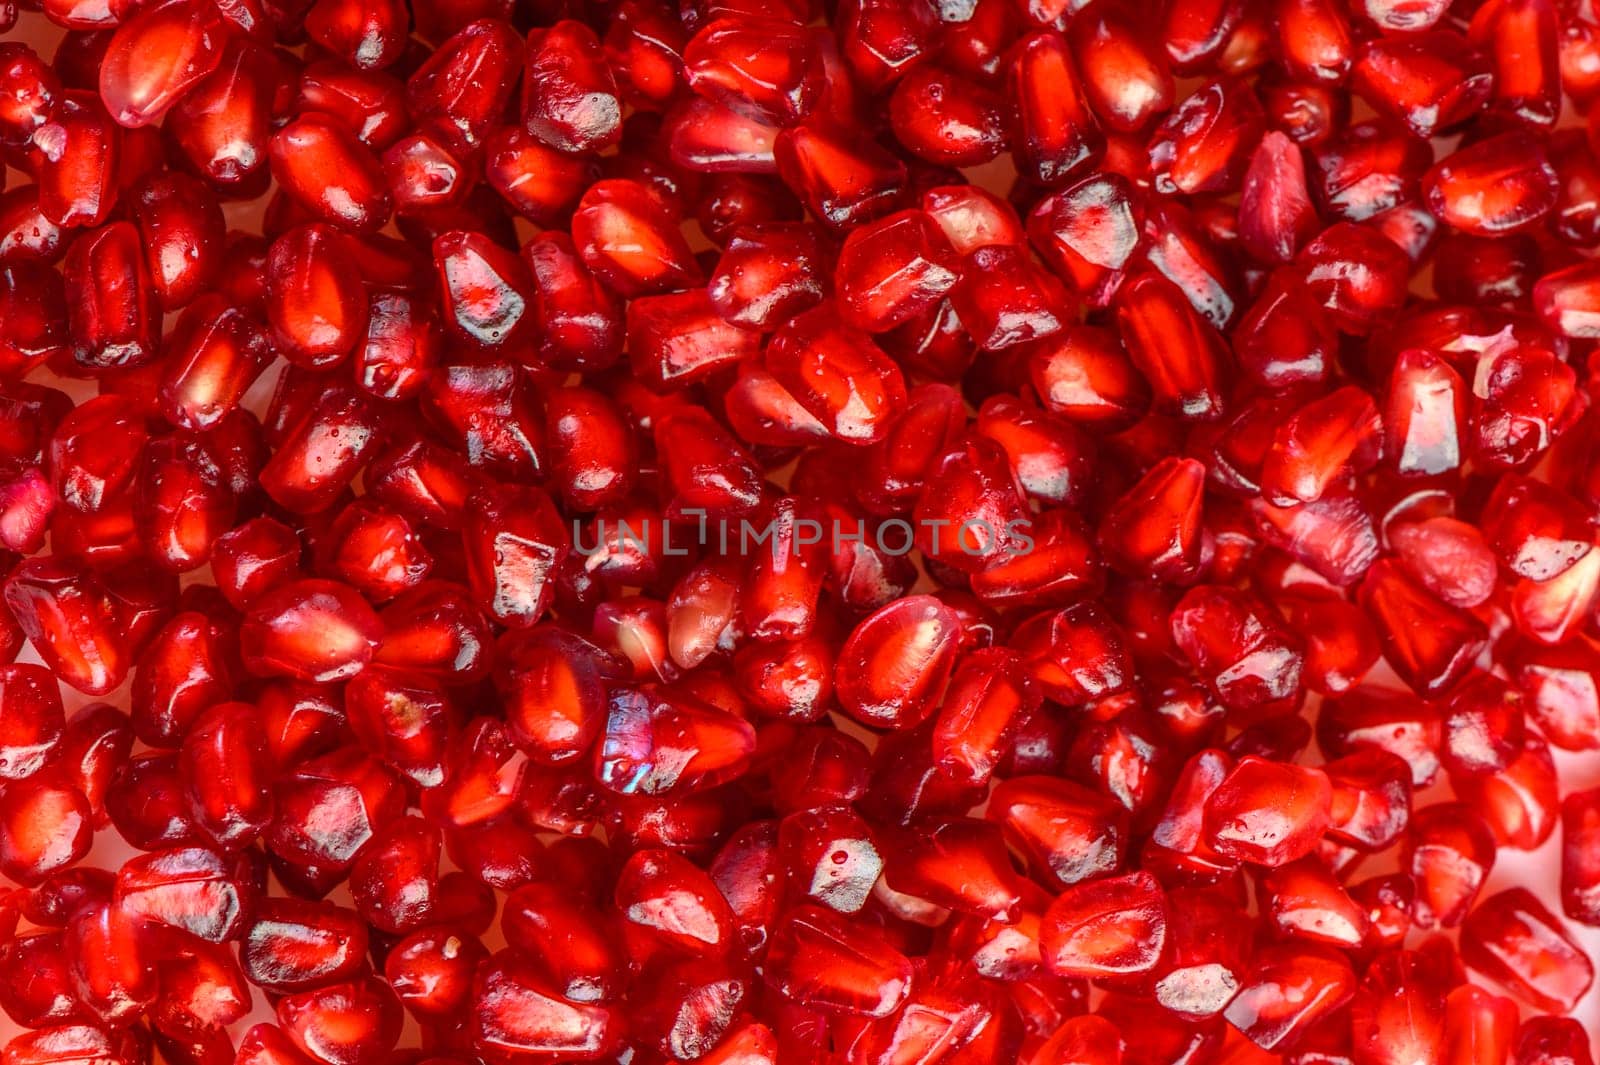 Delicious red ripe juicy pomegranate seed background texture 2 by Mixa74